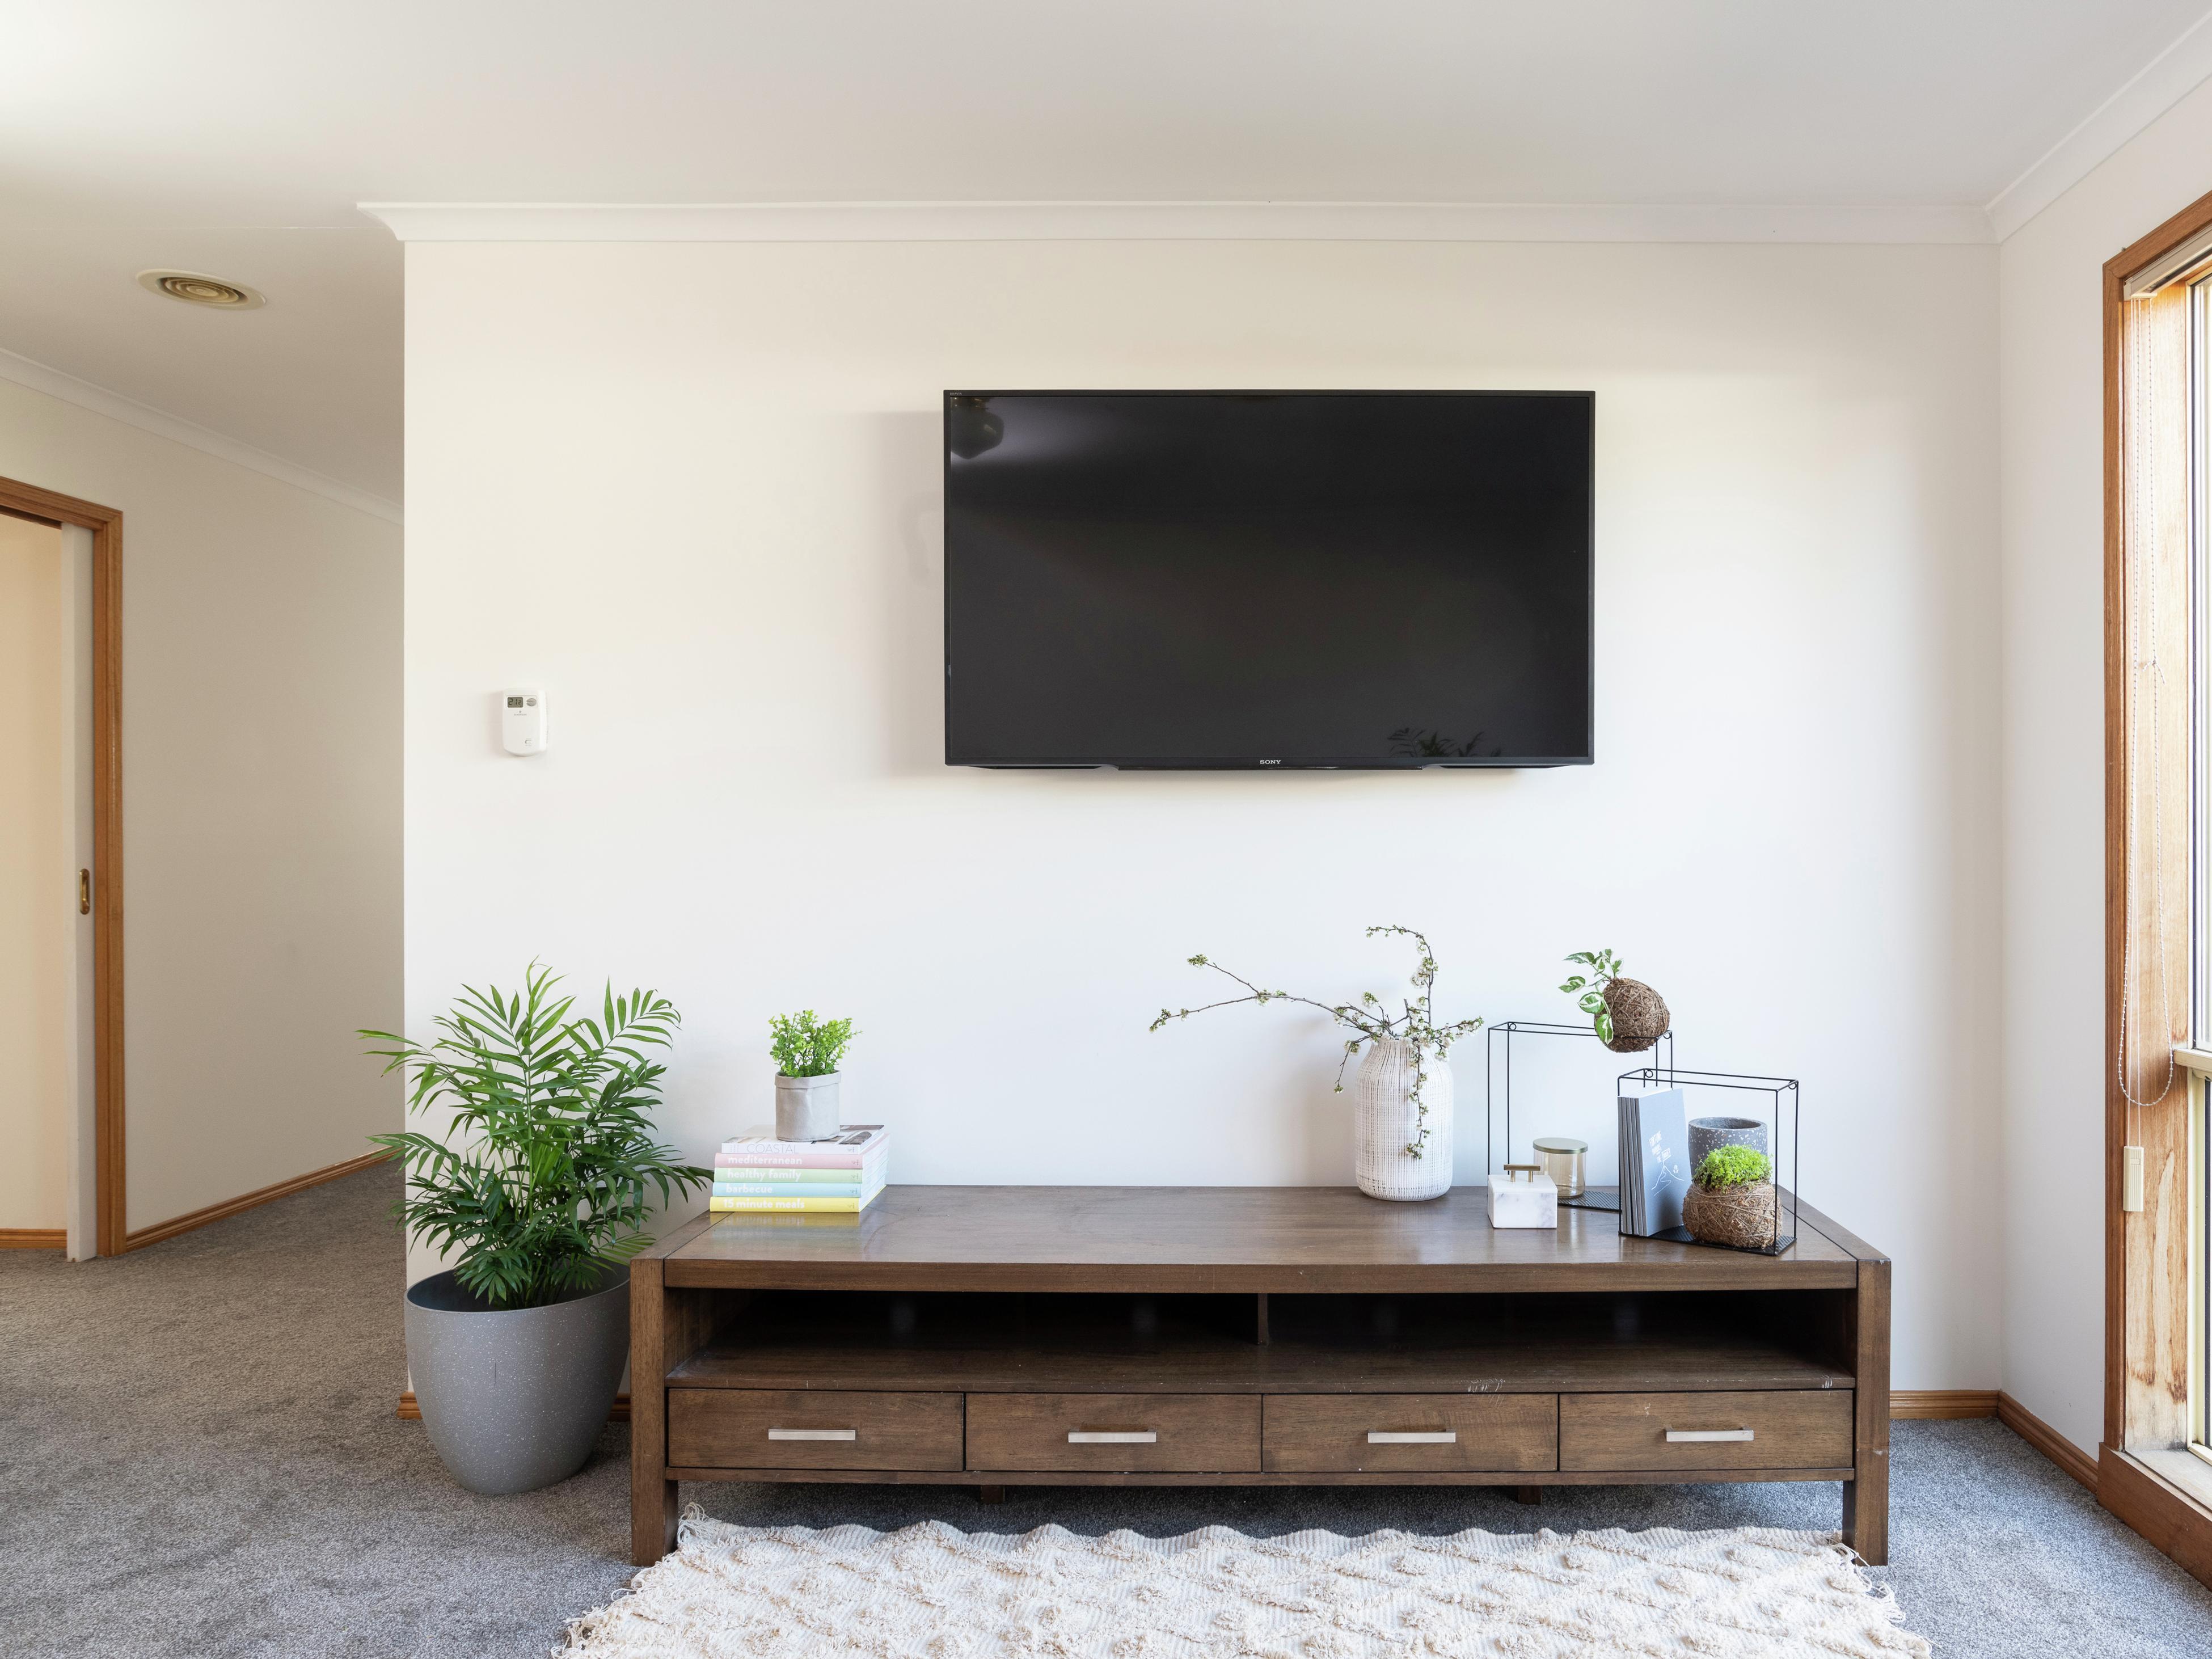 How To Install A TV Wall Mount - Bunnings Australia